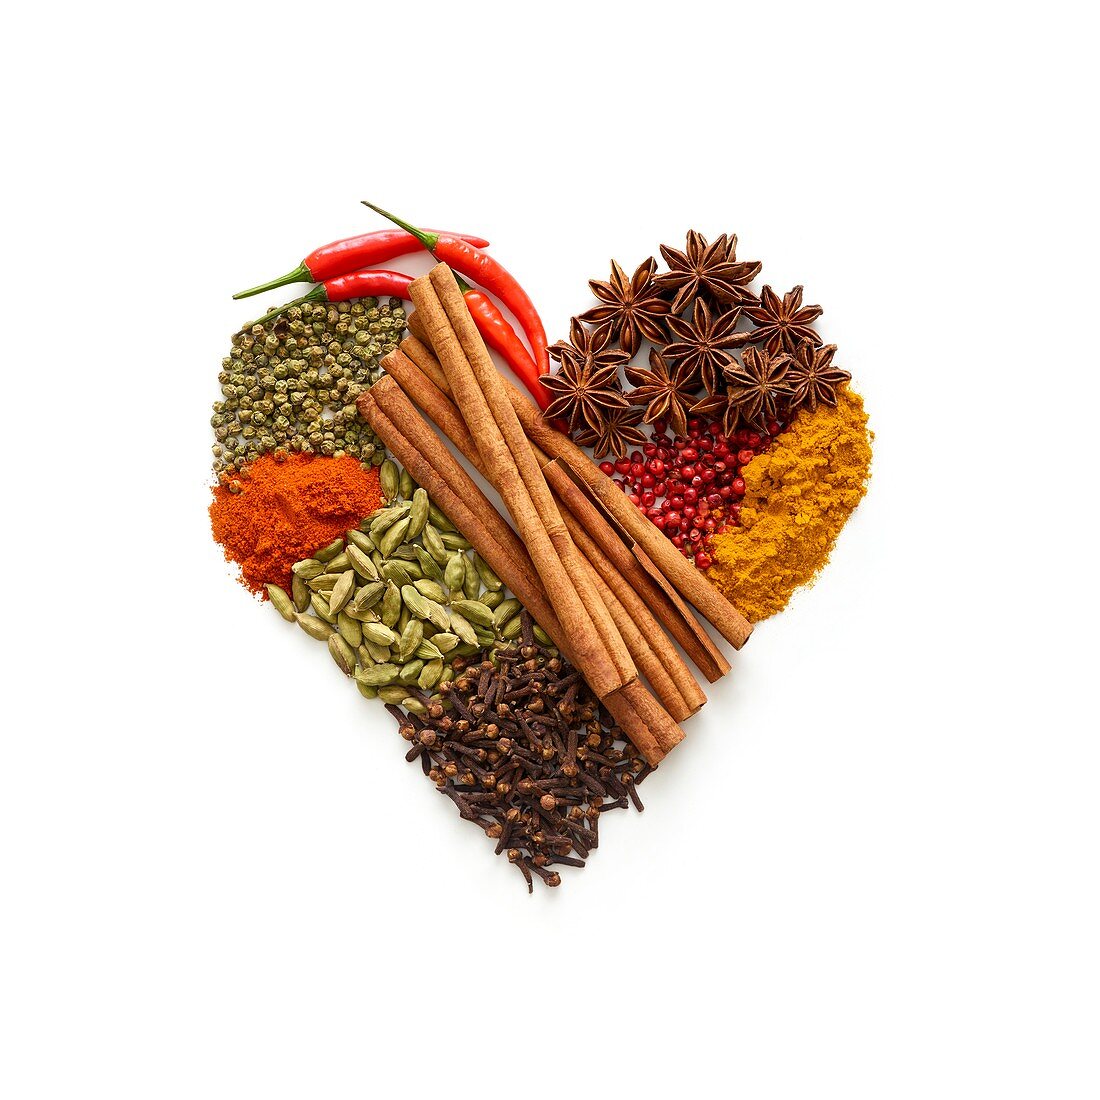 Dried spices in heart shape